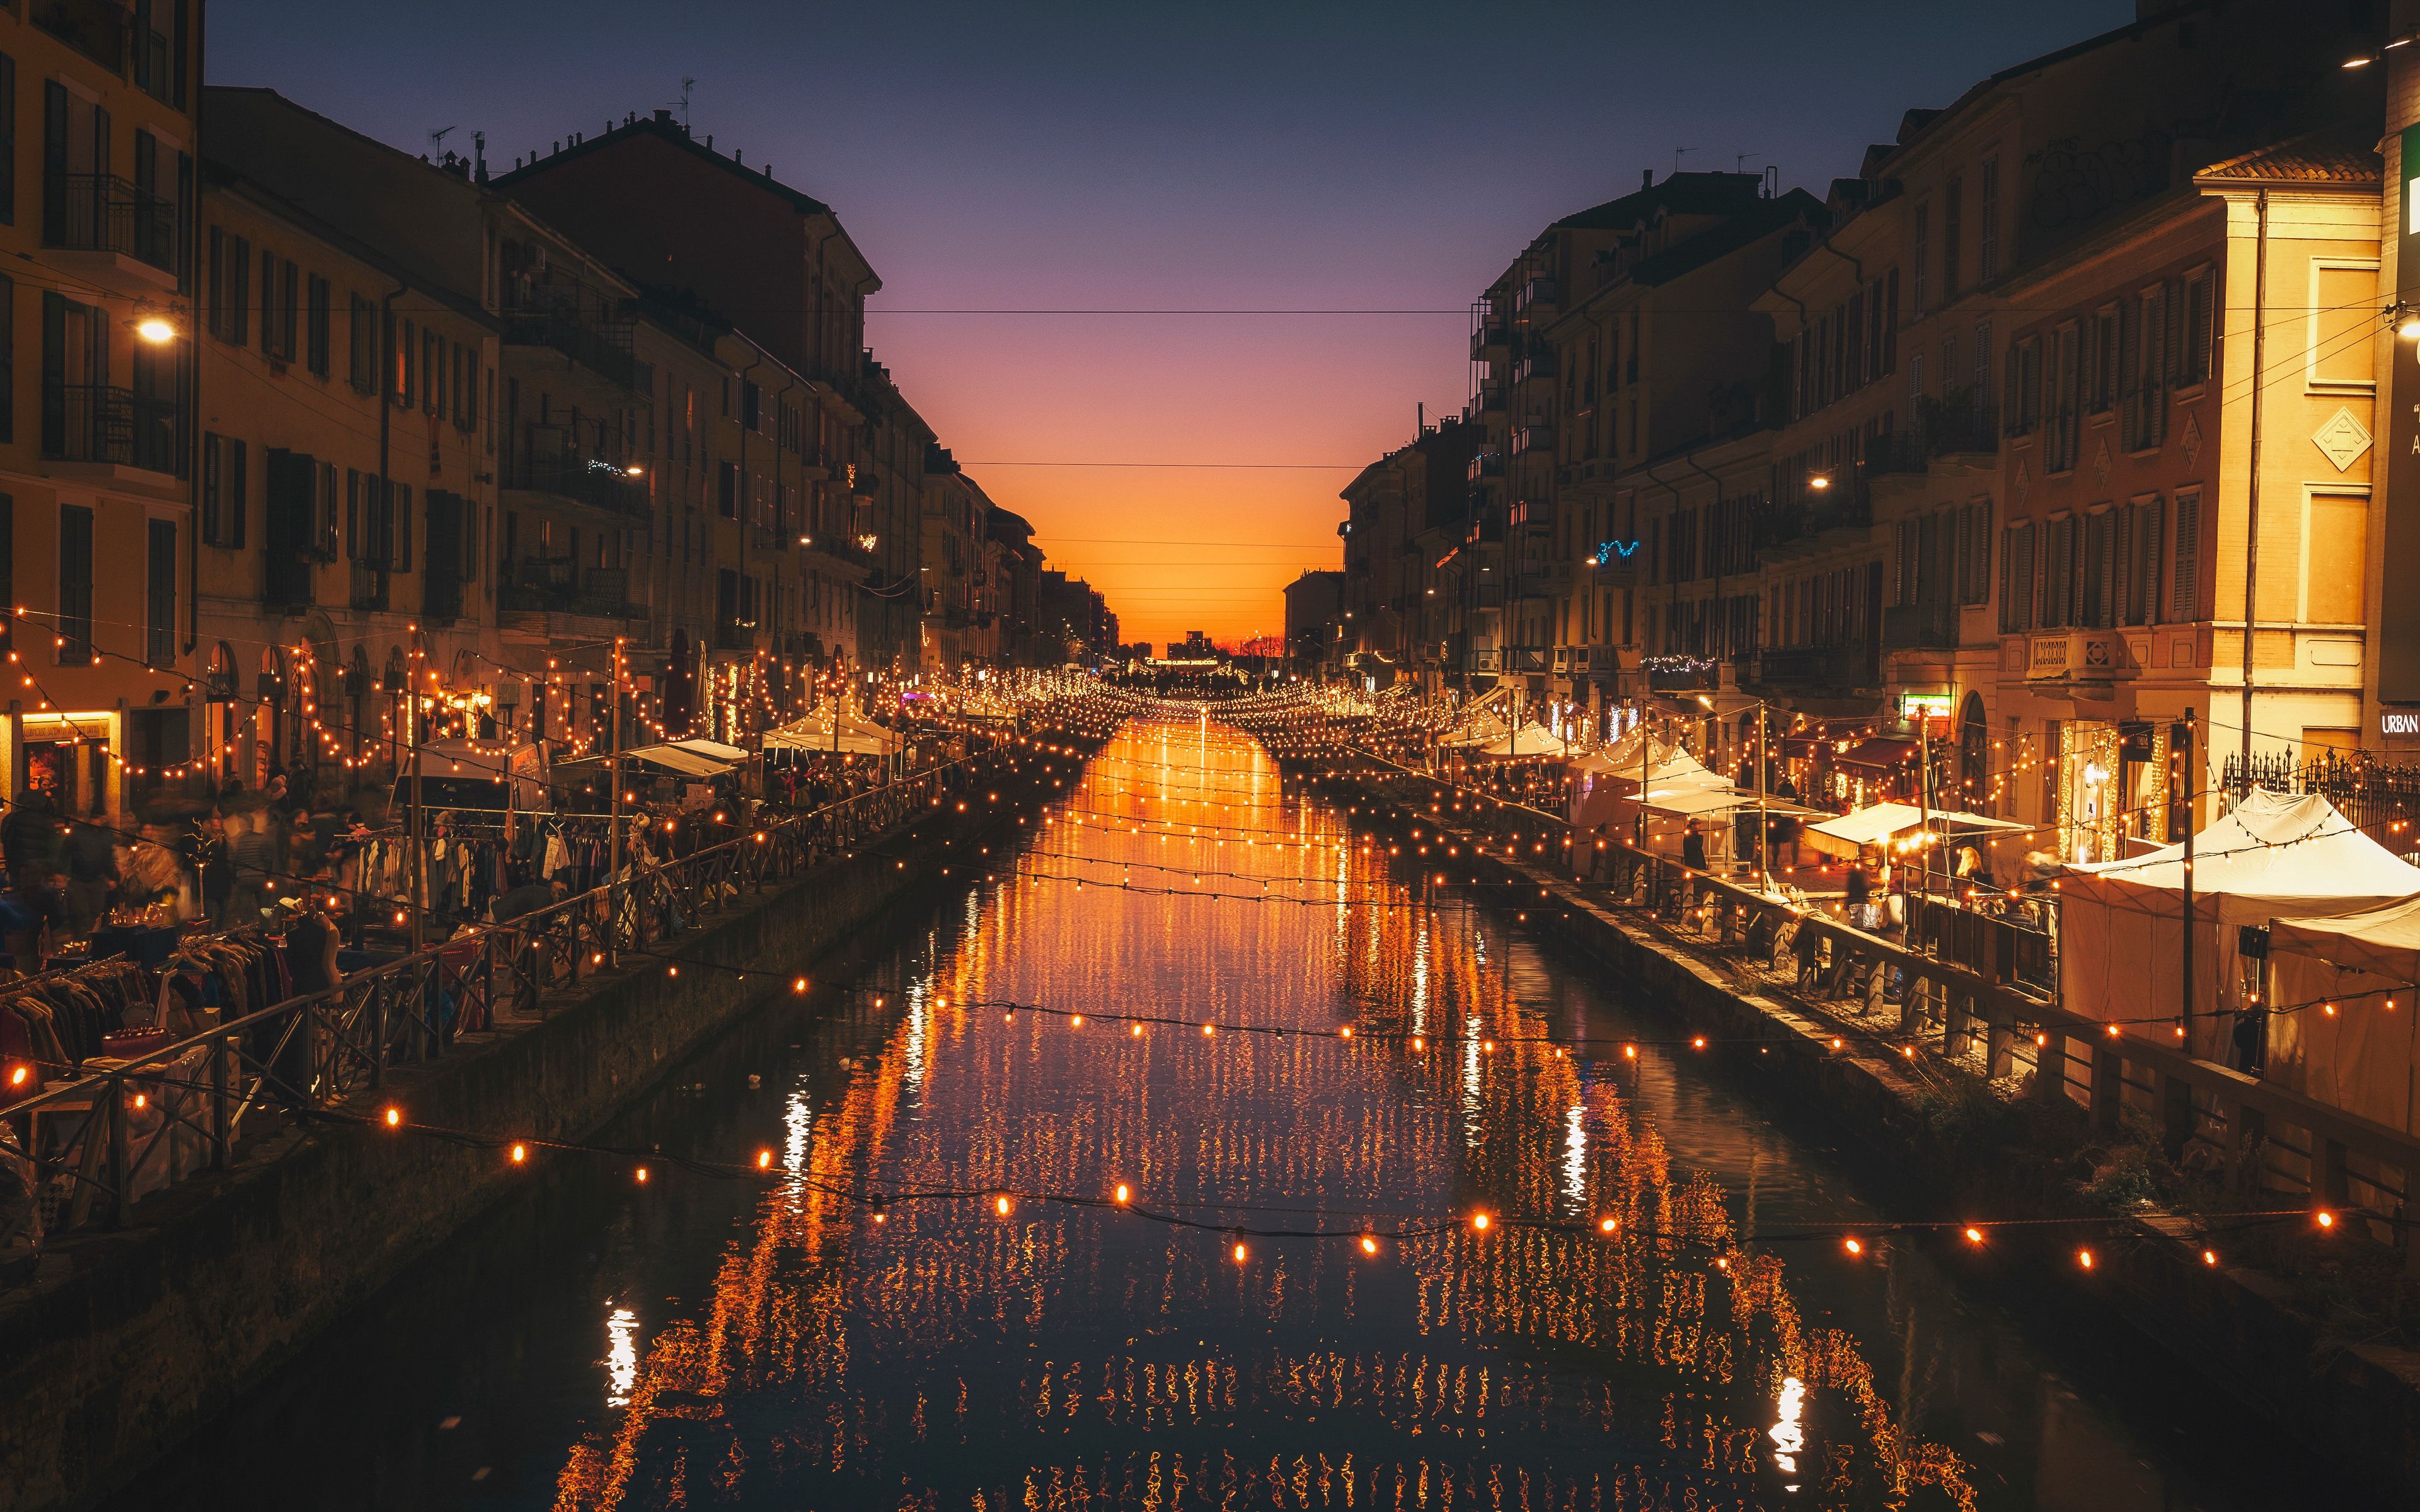 Download Wallpaper 3840x2400 Milan Italy River Evening City 4k Ultra Hd 16 10 Hd Background